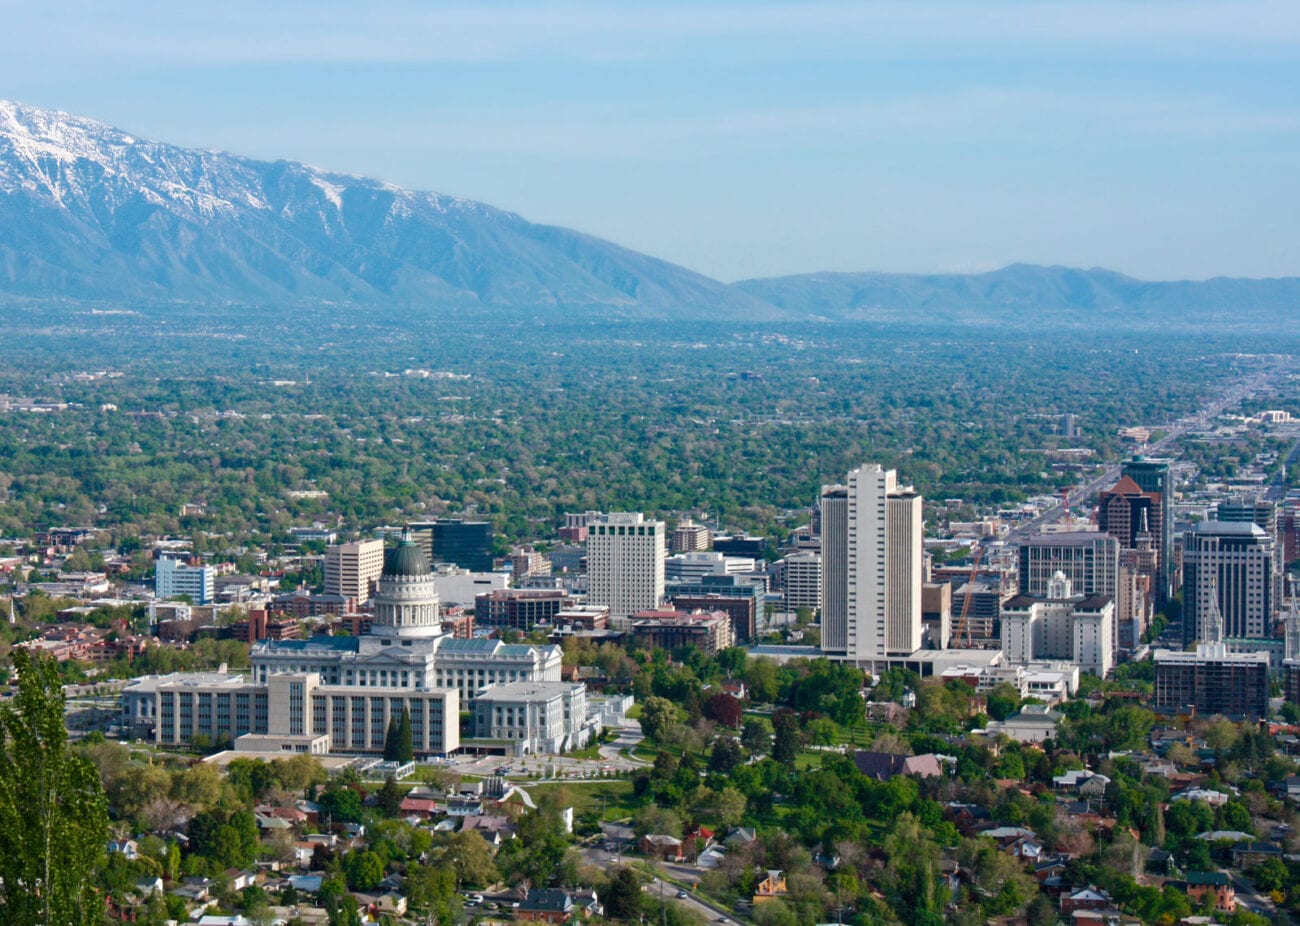 Salt Lake City is a hot spot for moving. Discover the finest professional movers service you can use in SLC.